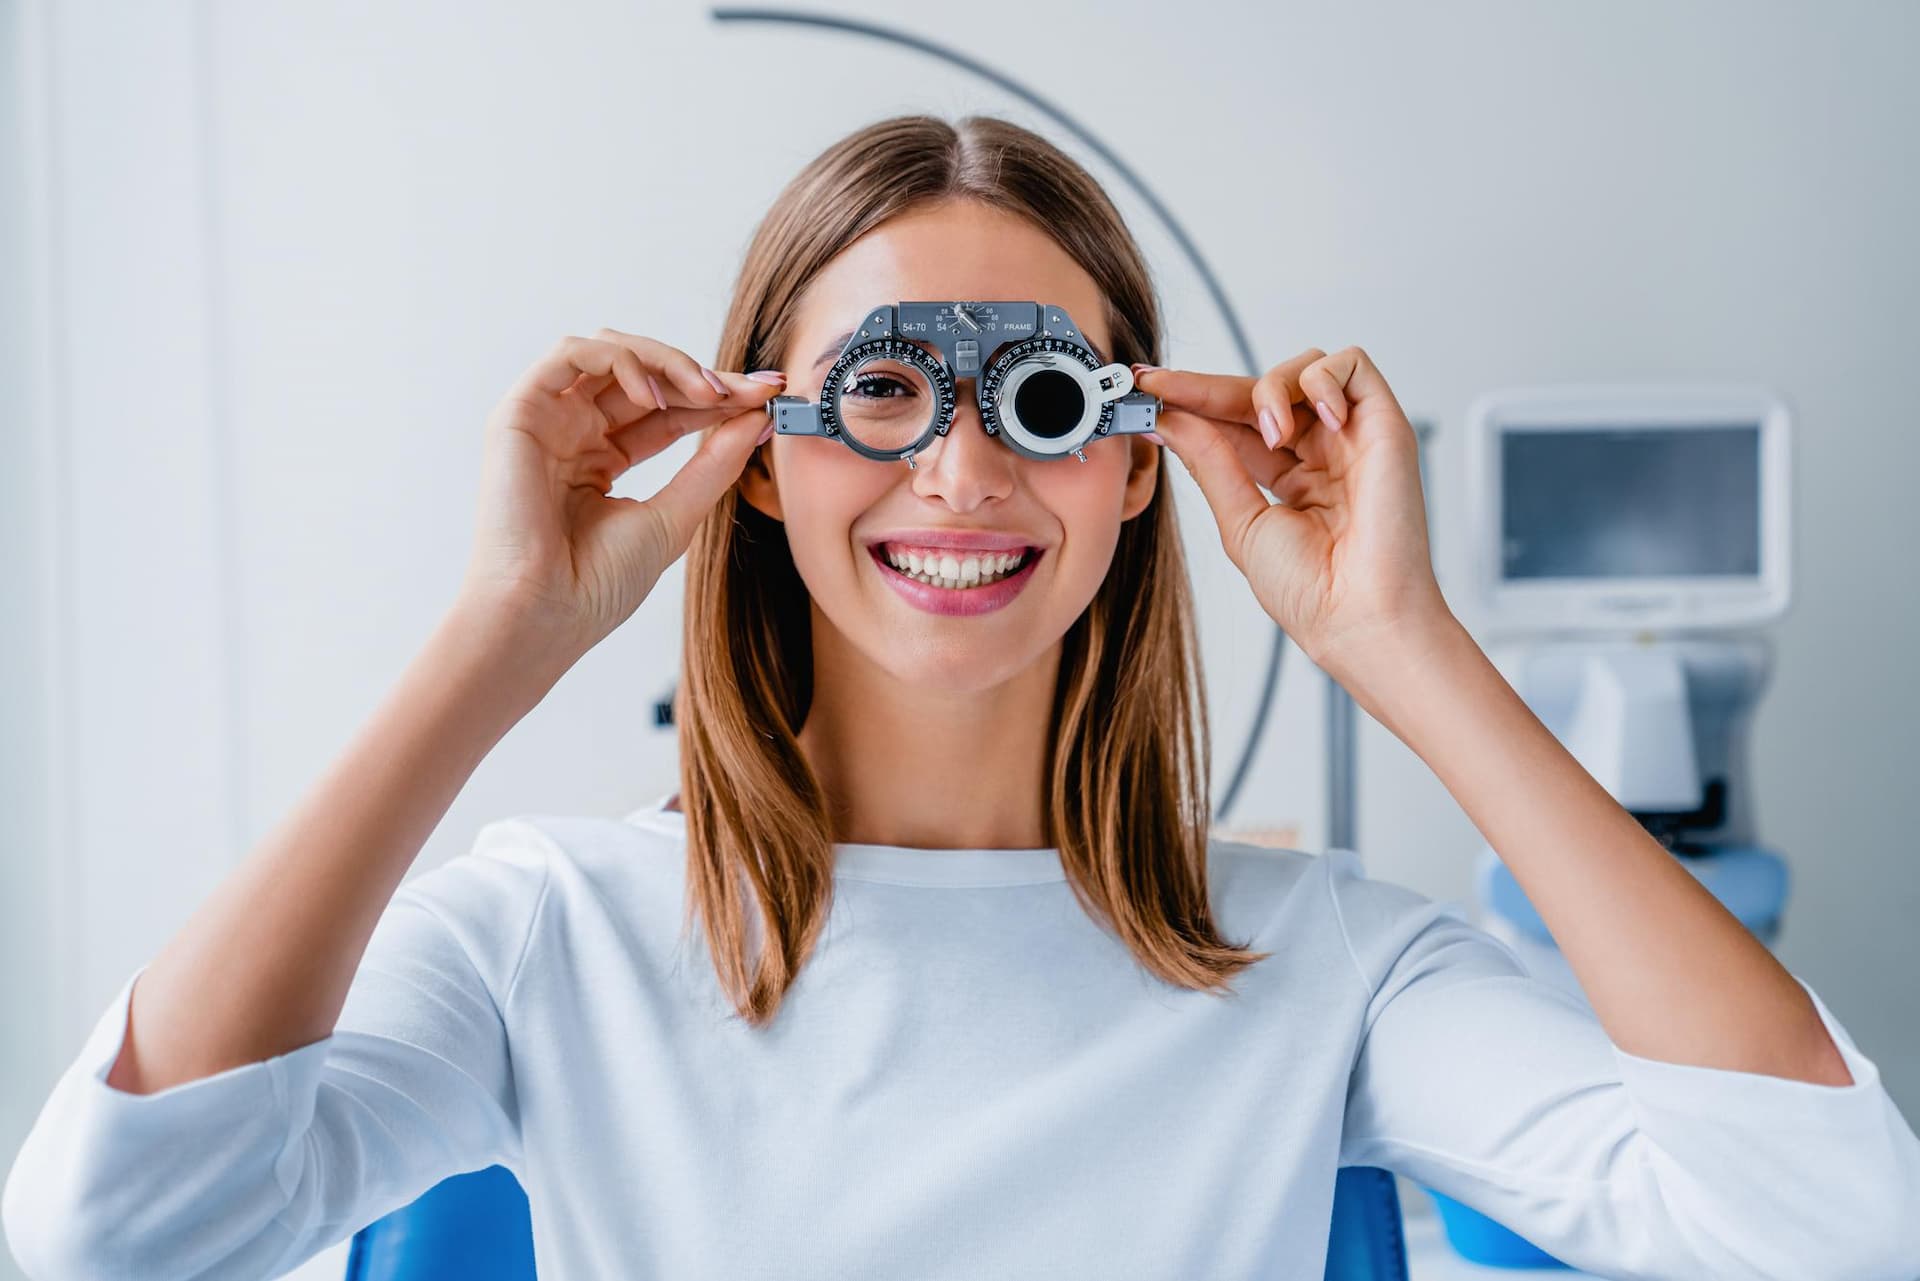 young woman checking vision with eye test glasses during a medical examination at the ophthalmological office